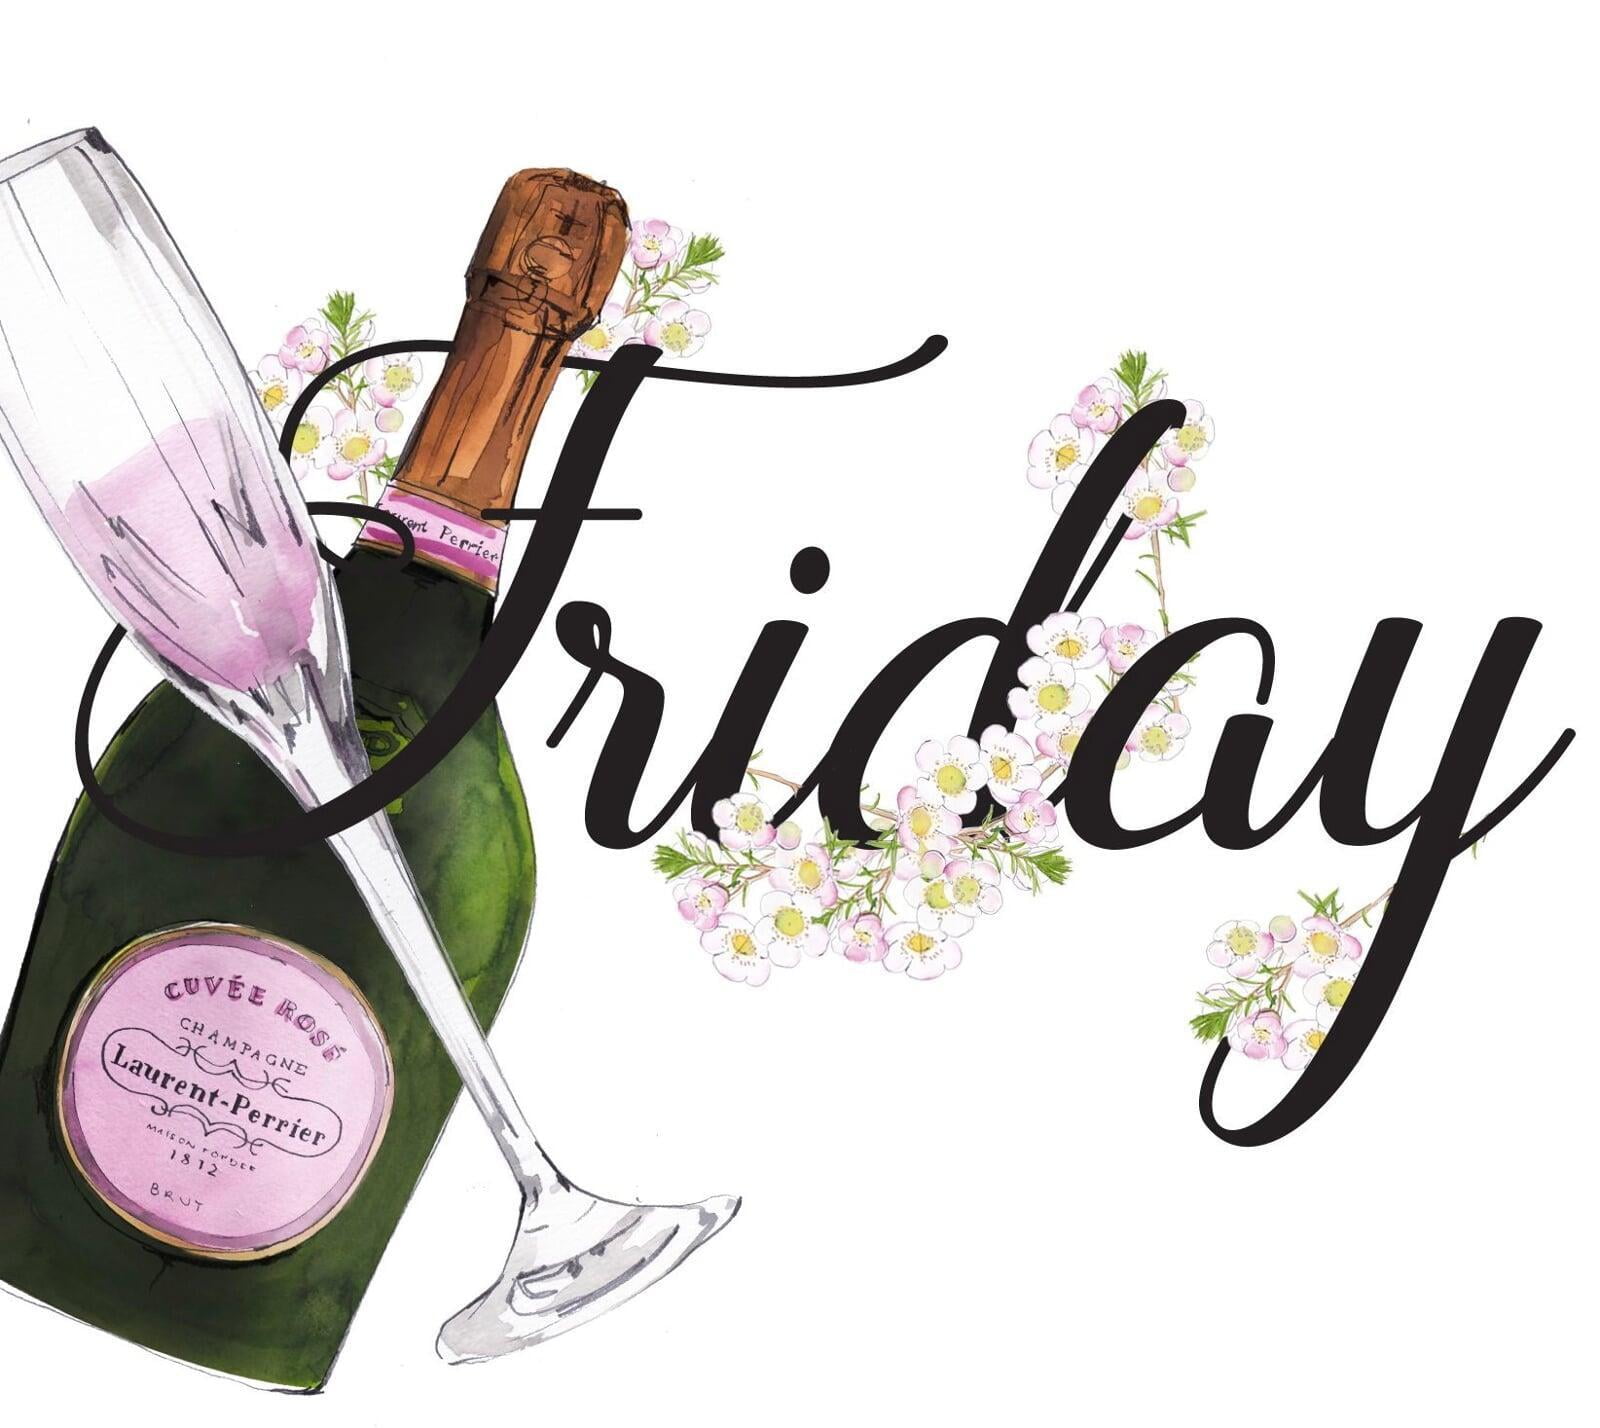 Fun Friday...finish your day sparkling!